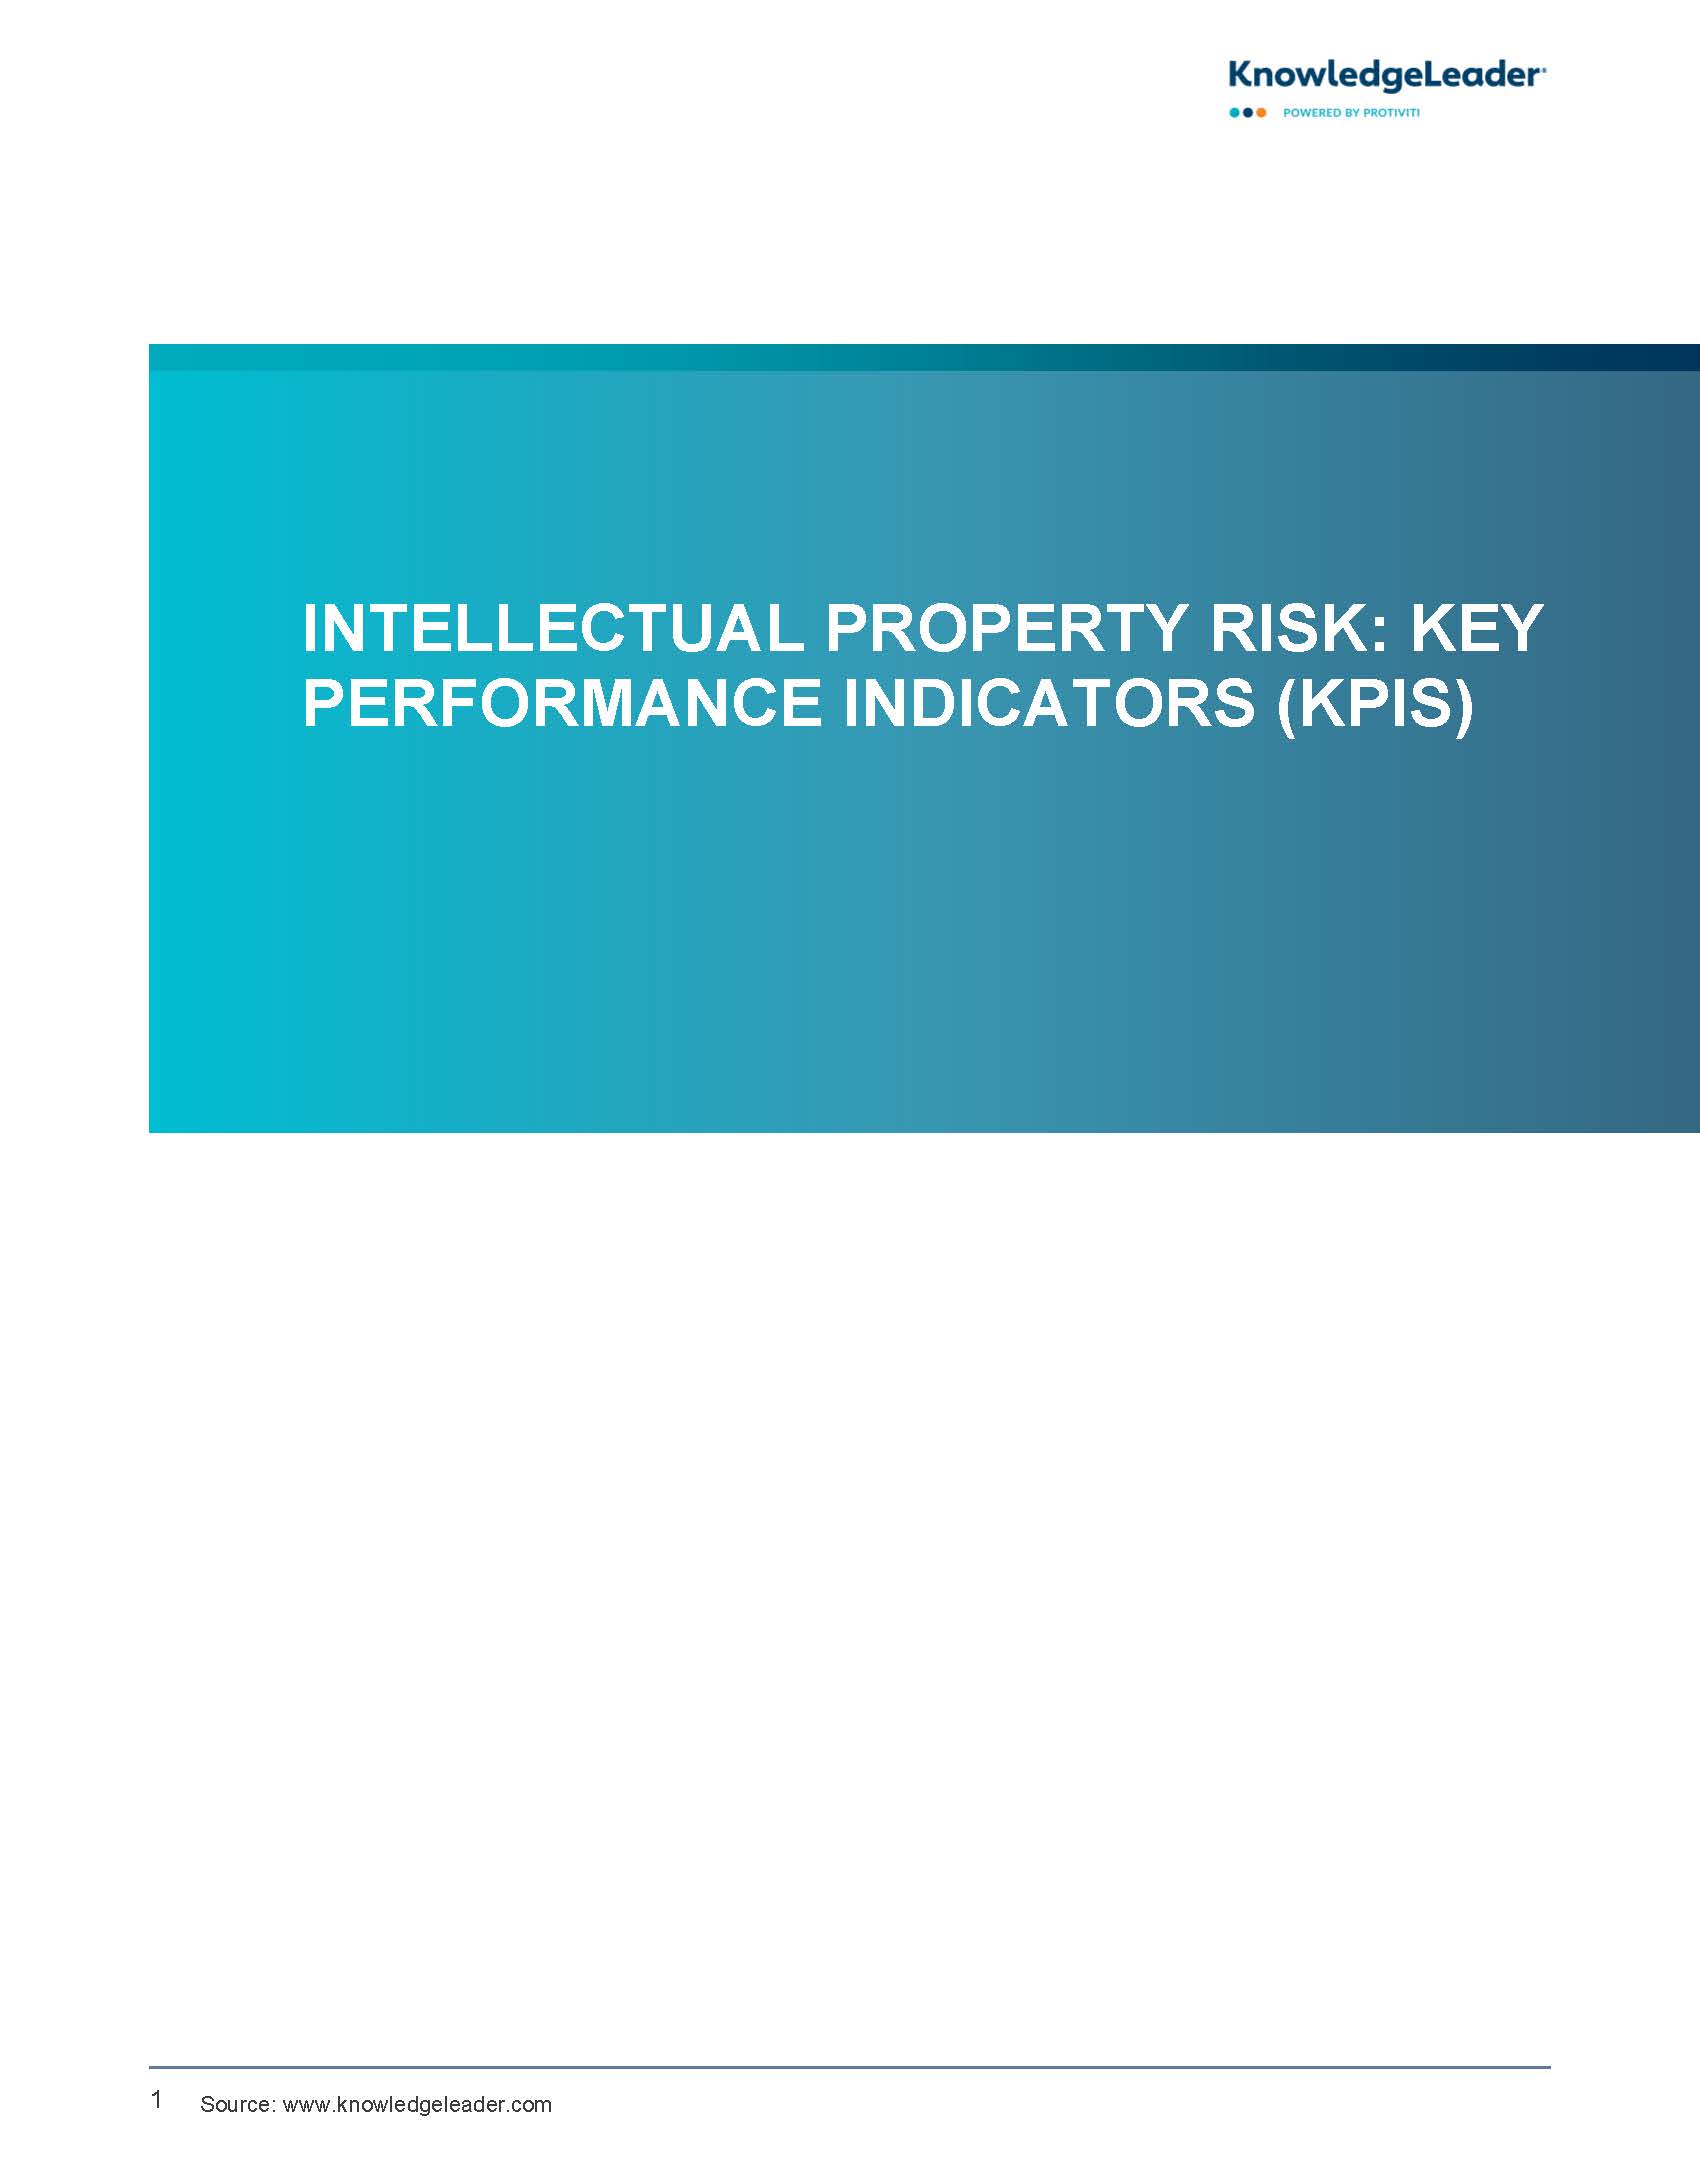 Screenshot of the first page of Intellectual Property Risk Key Performance Indicators (KPIs)